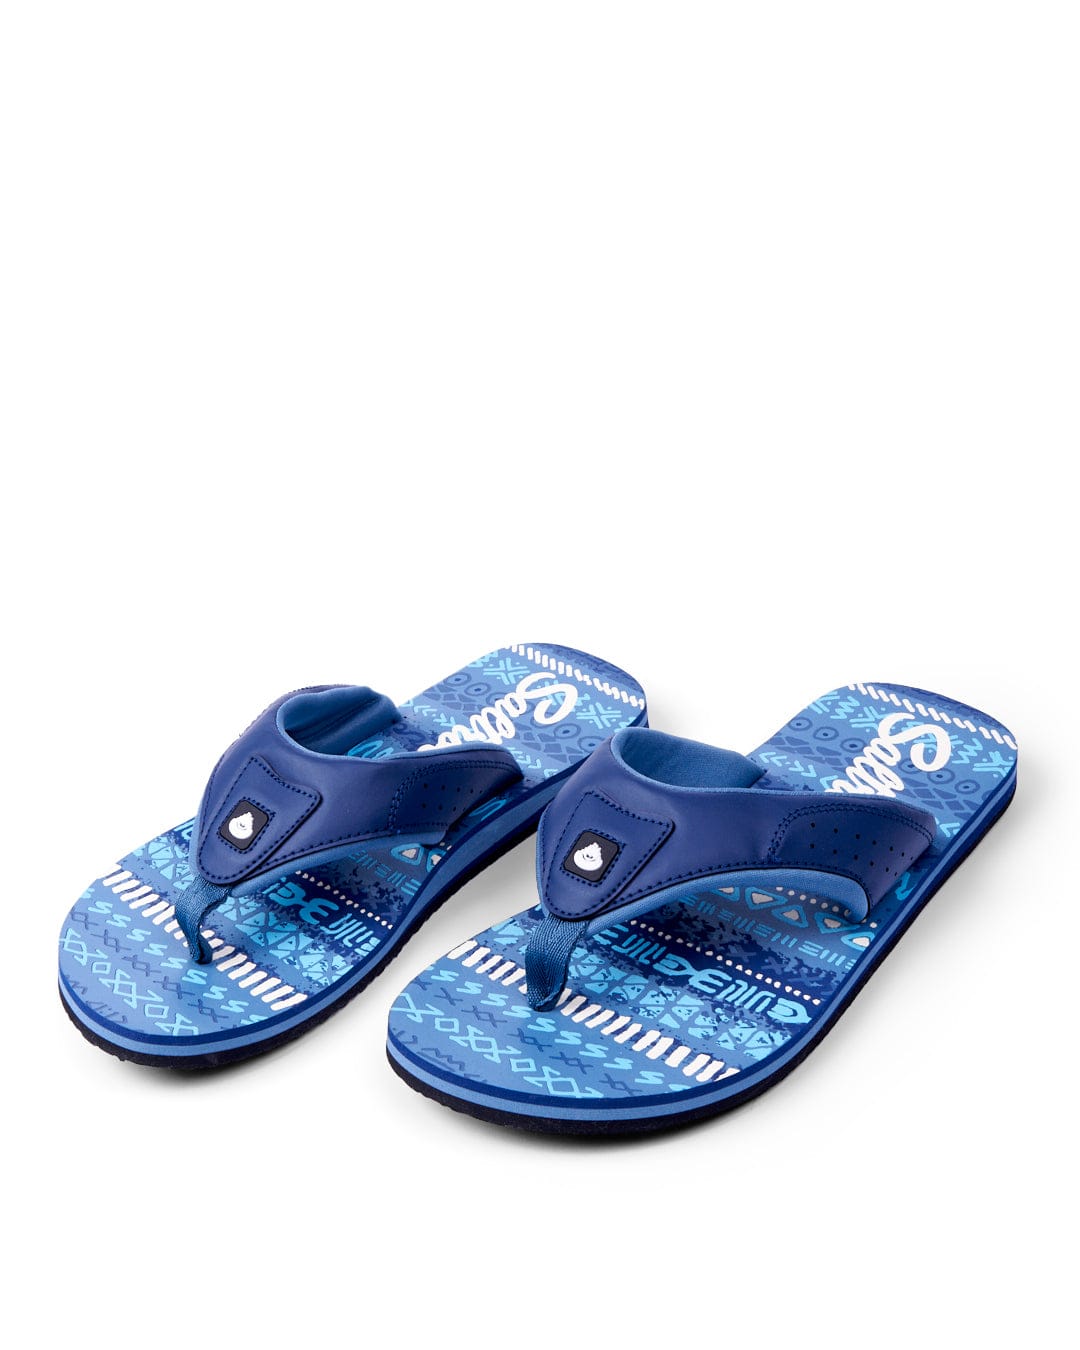 A pair of Marks Mens Flip Flops - Blue with patterned soles and Saltrock branded straps on a white background.